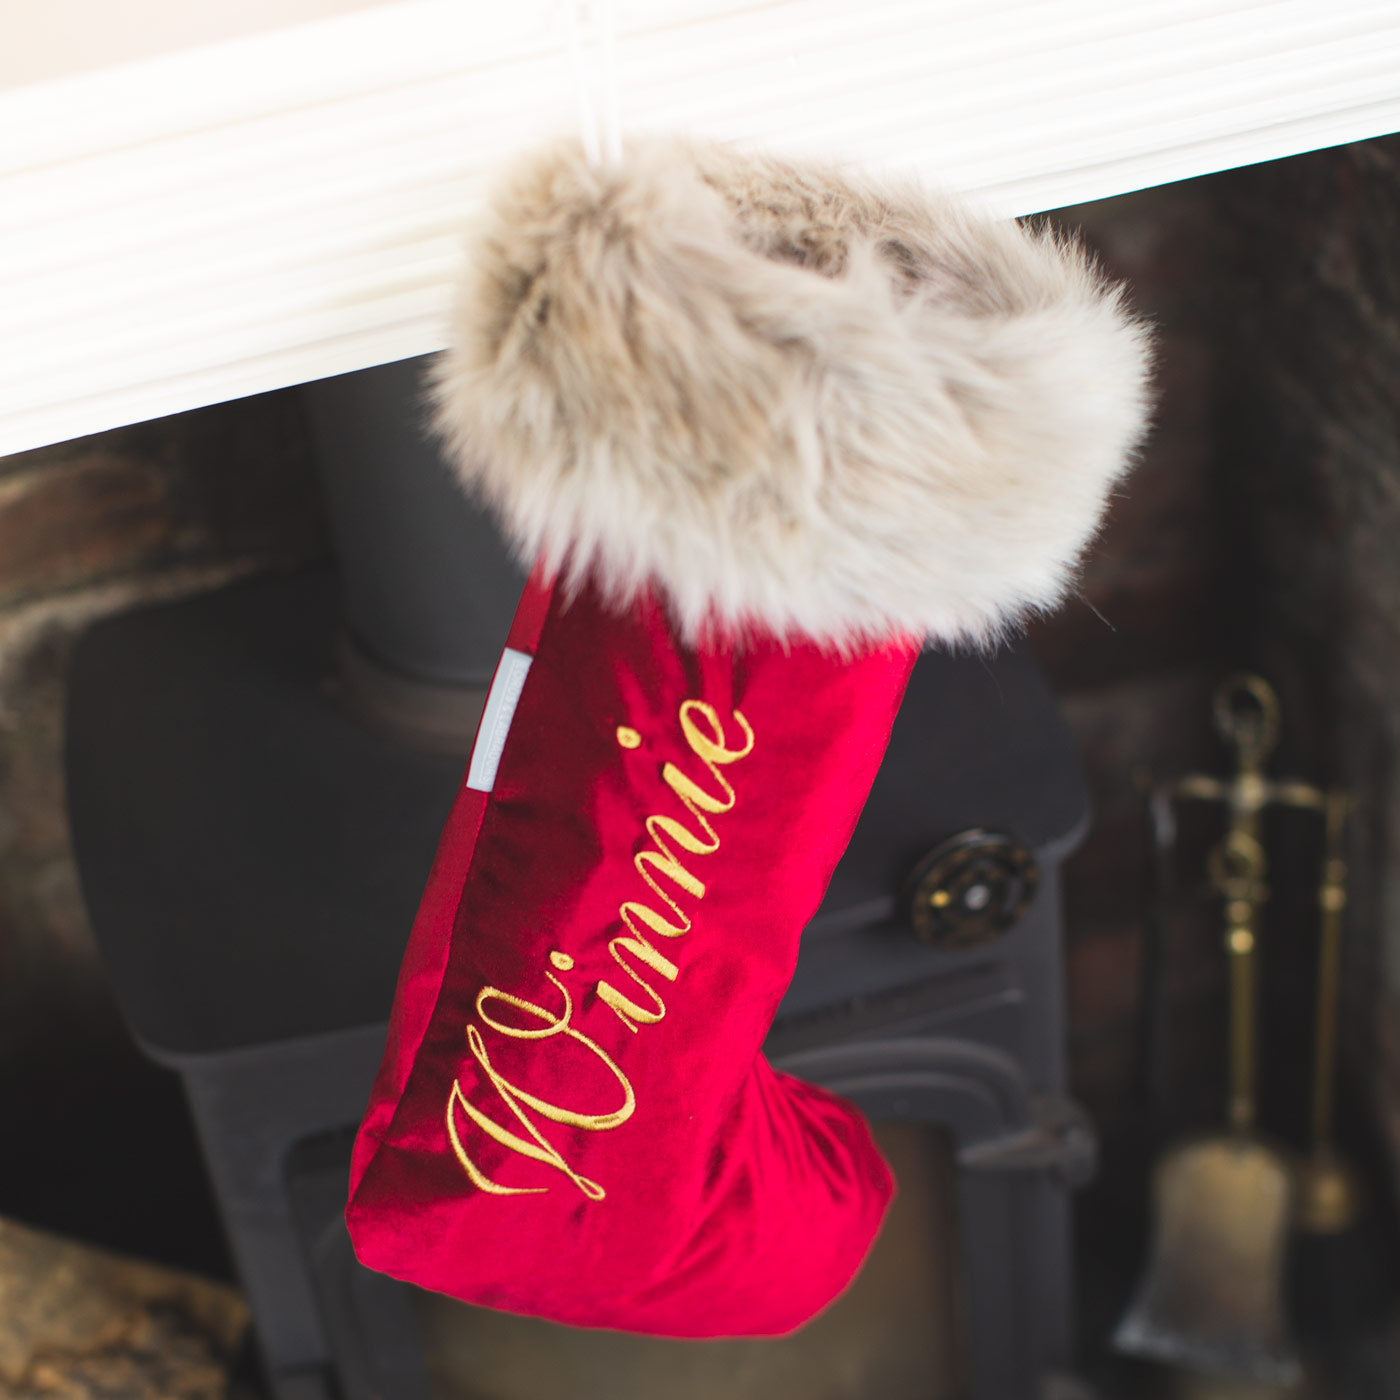 [colour:cranberry velvet] Gift your furry friend the perfect pet Christmas gift with our beautifully crafted Christmas Stocking Sock, fill and gift your pet this festive holiday with the most wholesome gifts for Christmas! Available now in stunning Cranberry Velvet at Lords & Labradors